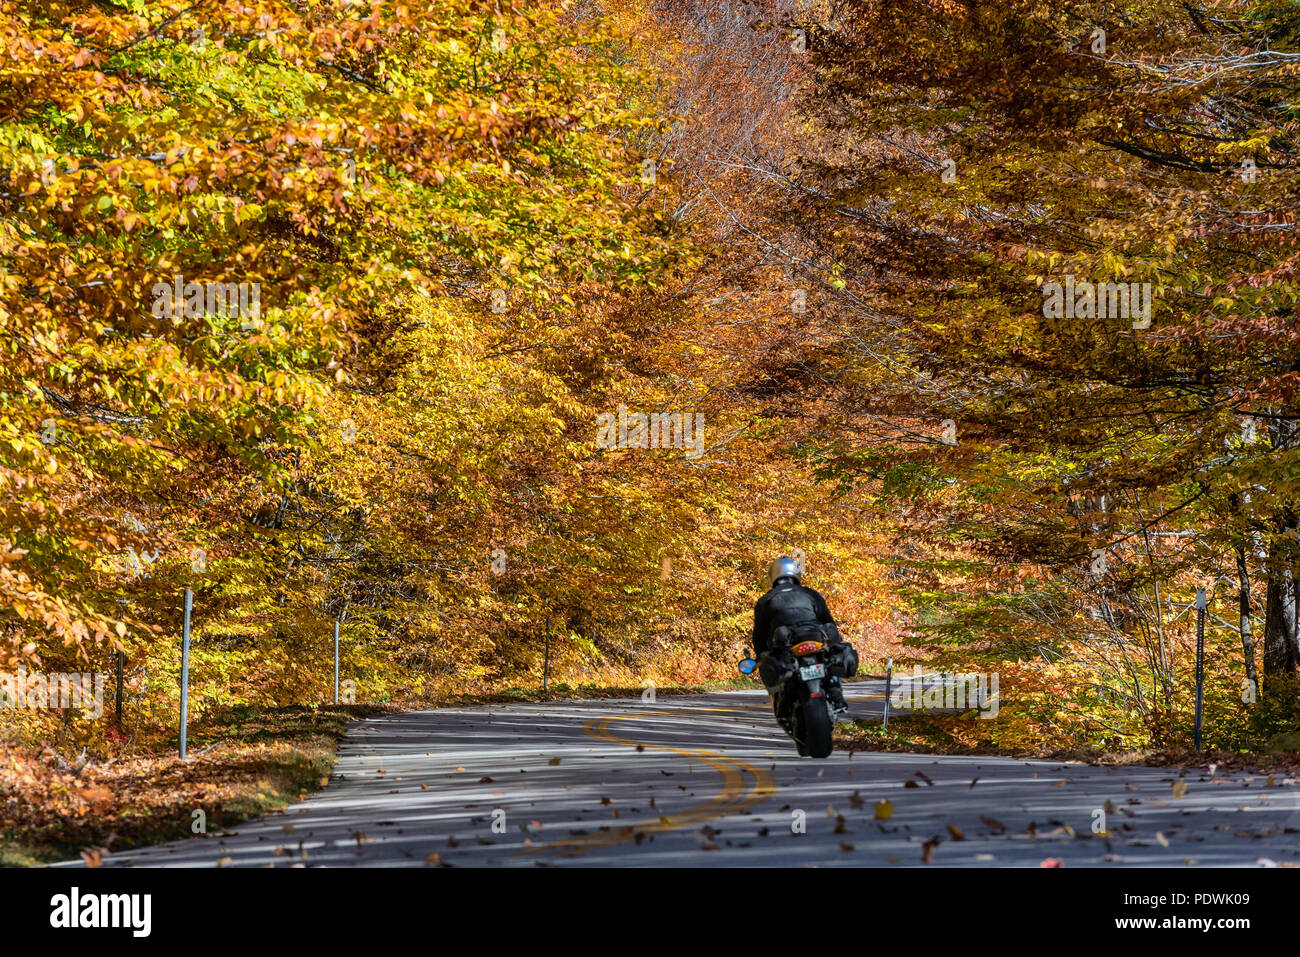 Motorcyclist on rural autumn road, White Mountains National Forest, New Hampshire, USA. Stock Photo